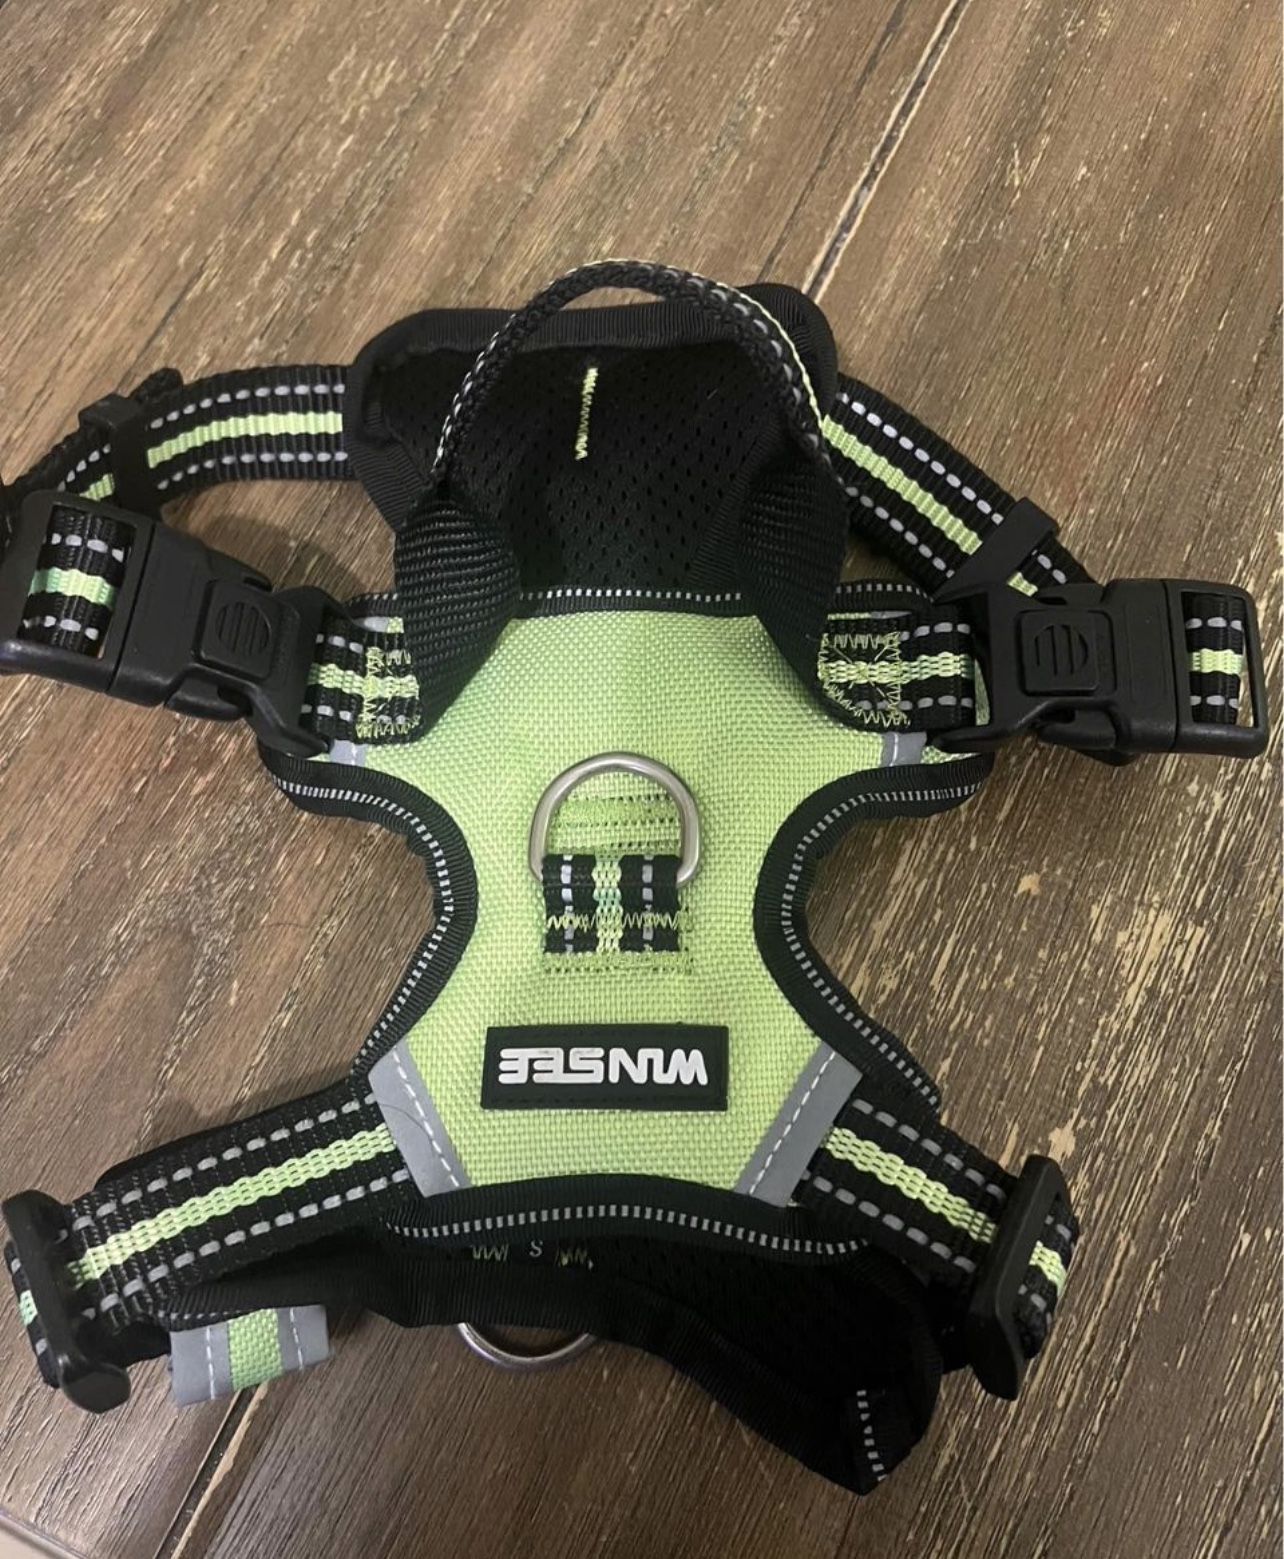 Puppy Harness Size Small 